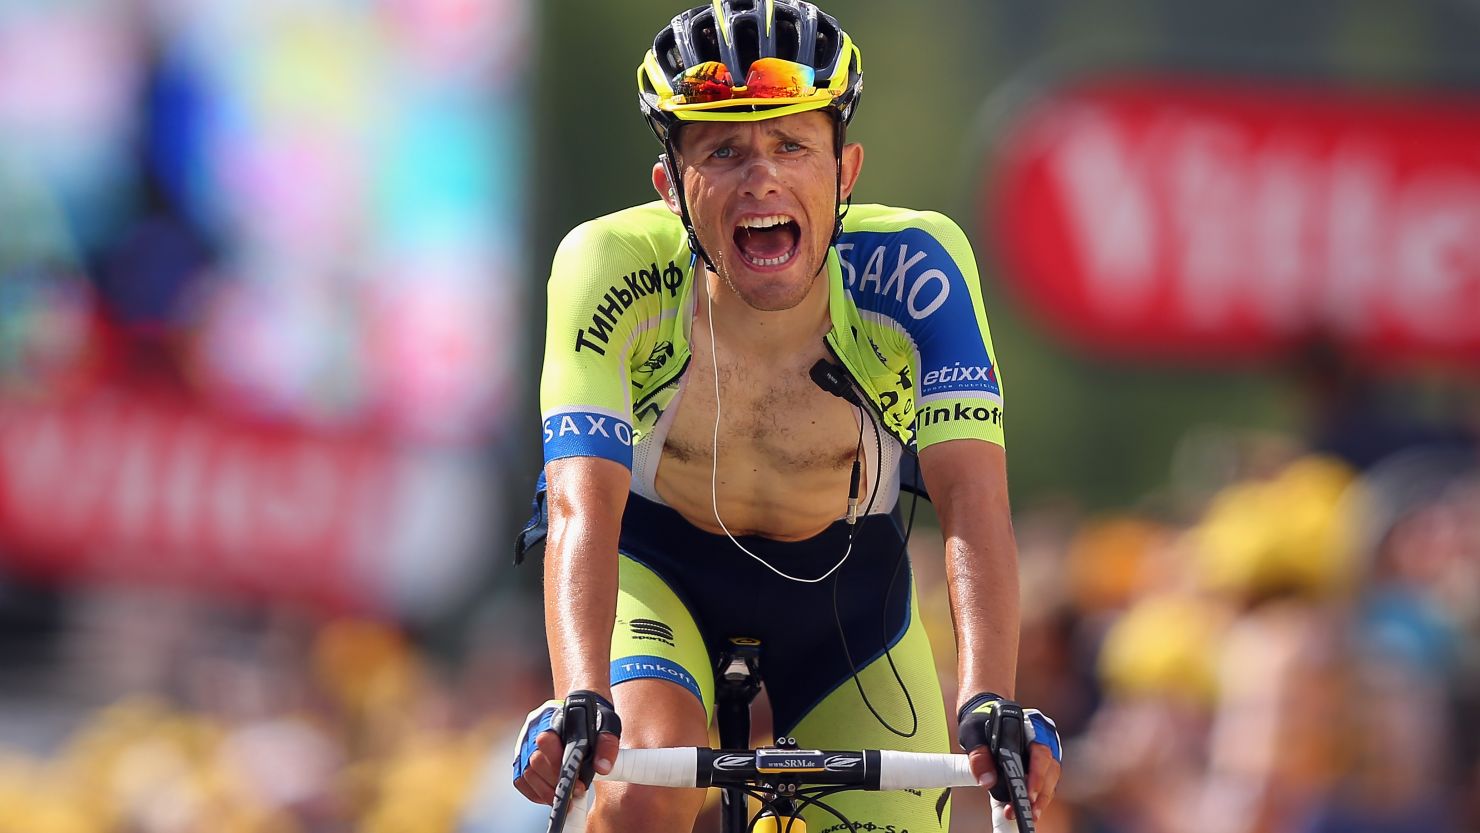 Polish rider Rafal Majka crosses the finish line first in stage 14 of the Tour de France.  